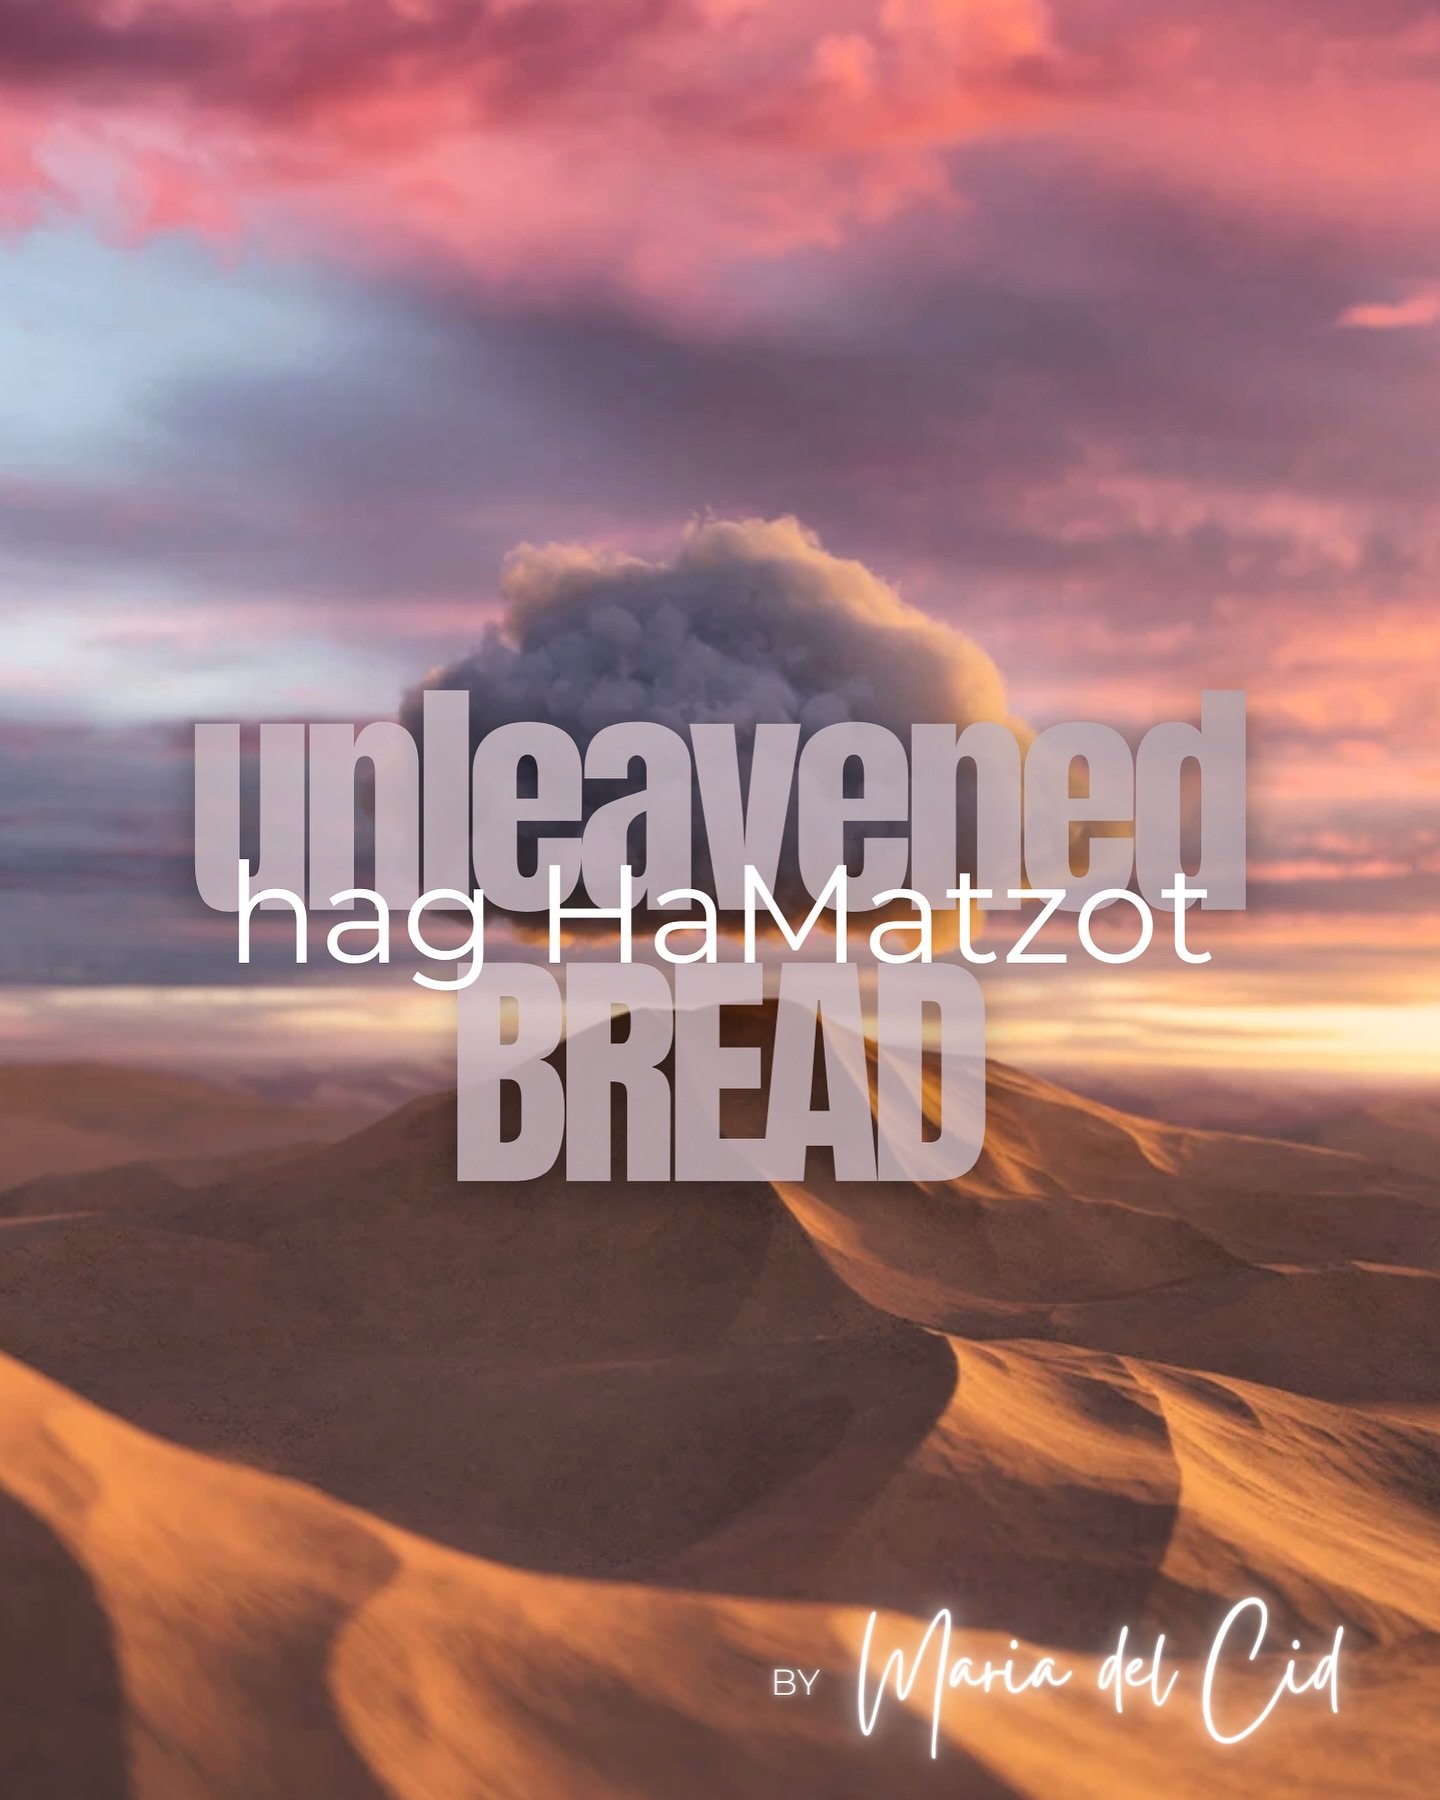 BLOG | Unleavened Bread &bull; Festivals of God 

Removing the yeast from the soul.

&ldquo;6On the fifteenth day of that month the Lord&rsquo;s Festival of Unleavened Bread begins; for seven days you must eat bread made without yeast.&ldquo; |&nbsp;